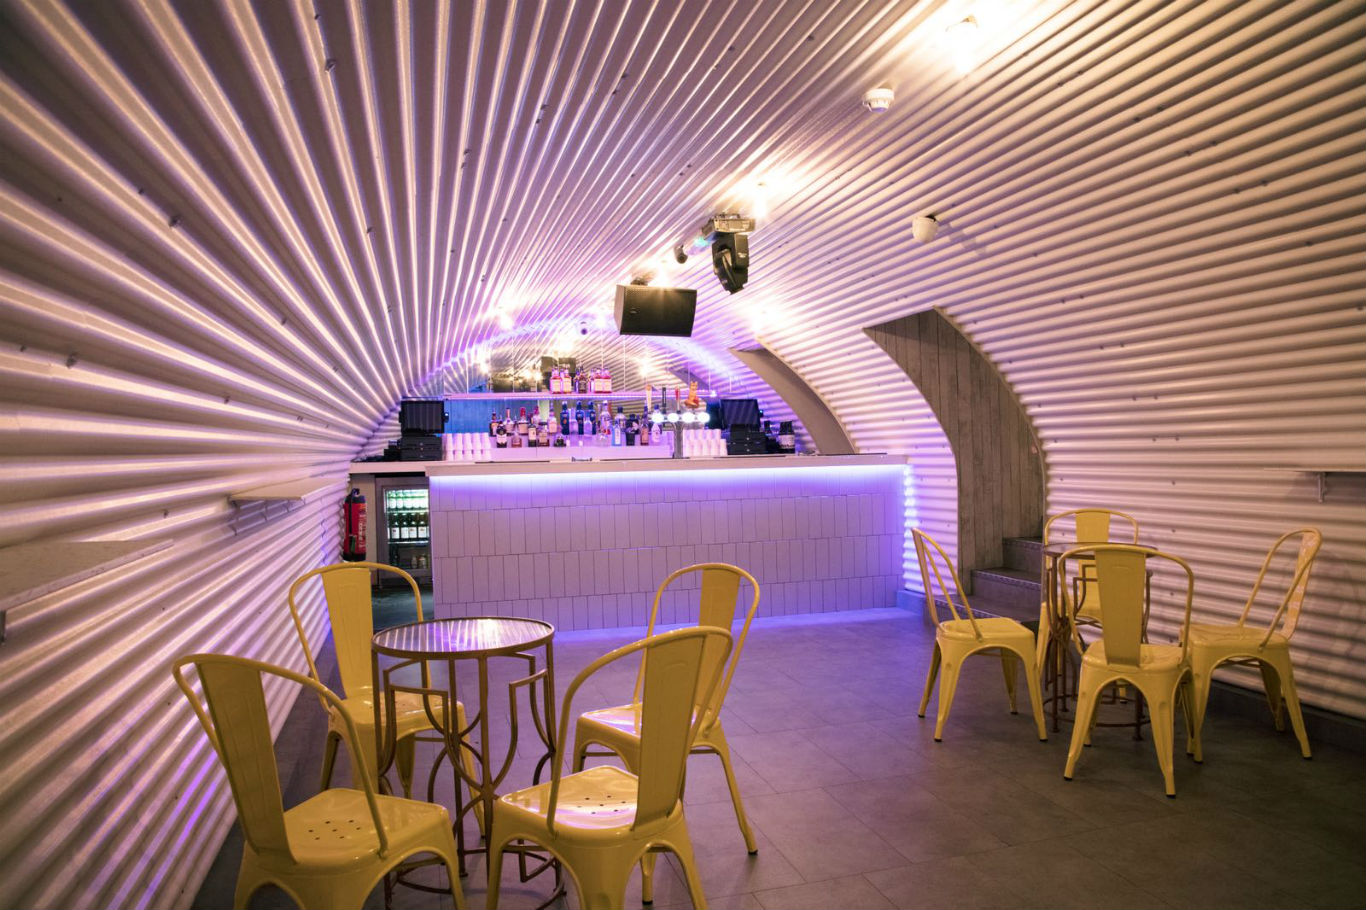 Inside She bar - chairs, a rounded tin roof,  